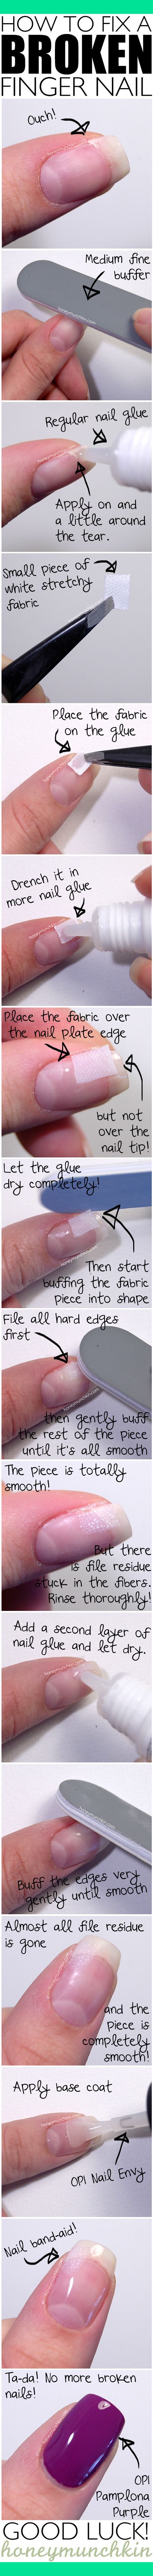 How to fix a broken finger nail